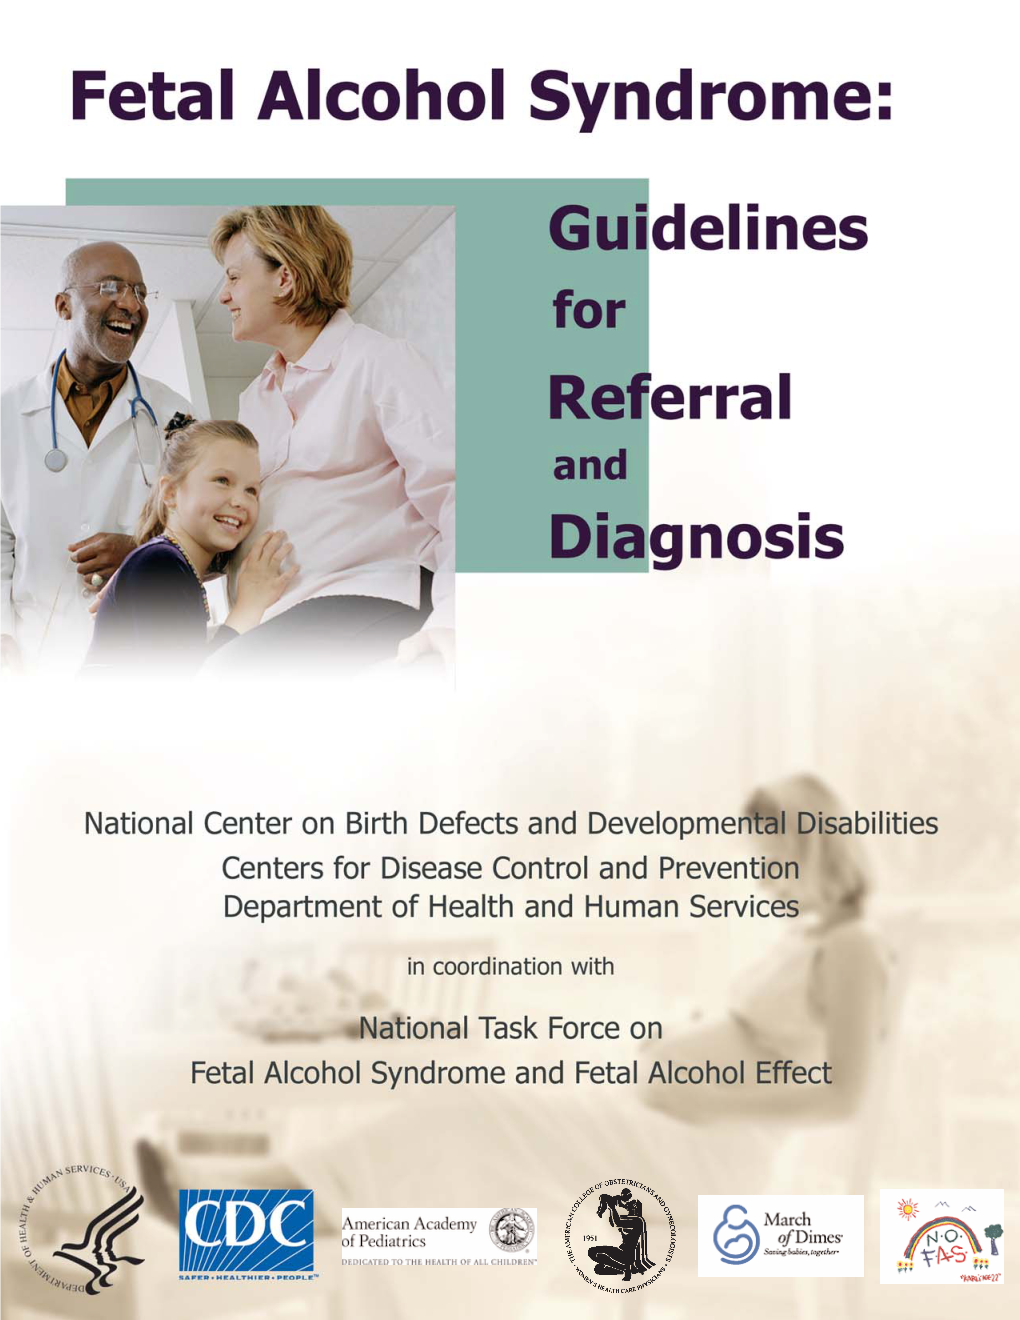 Fetal Alcohol Syndrome: Guidelines for Referral and Diagnosis